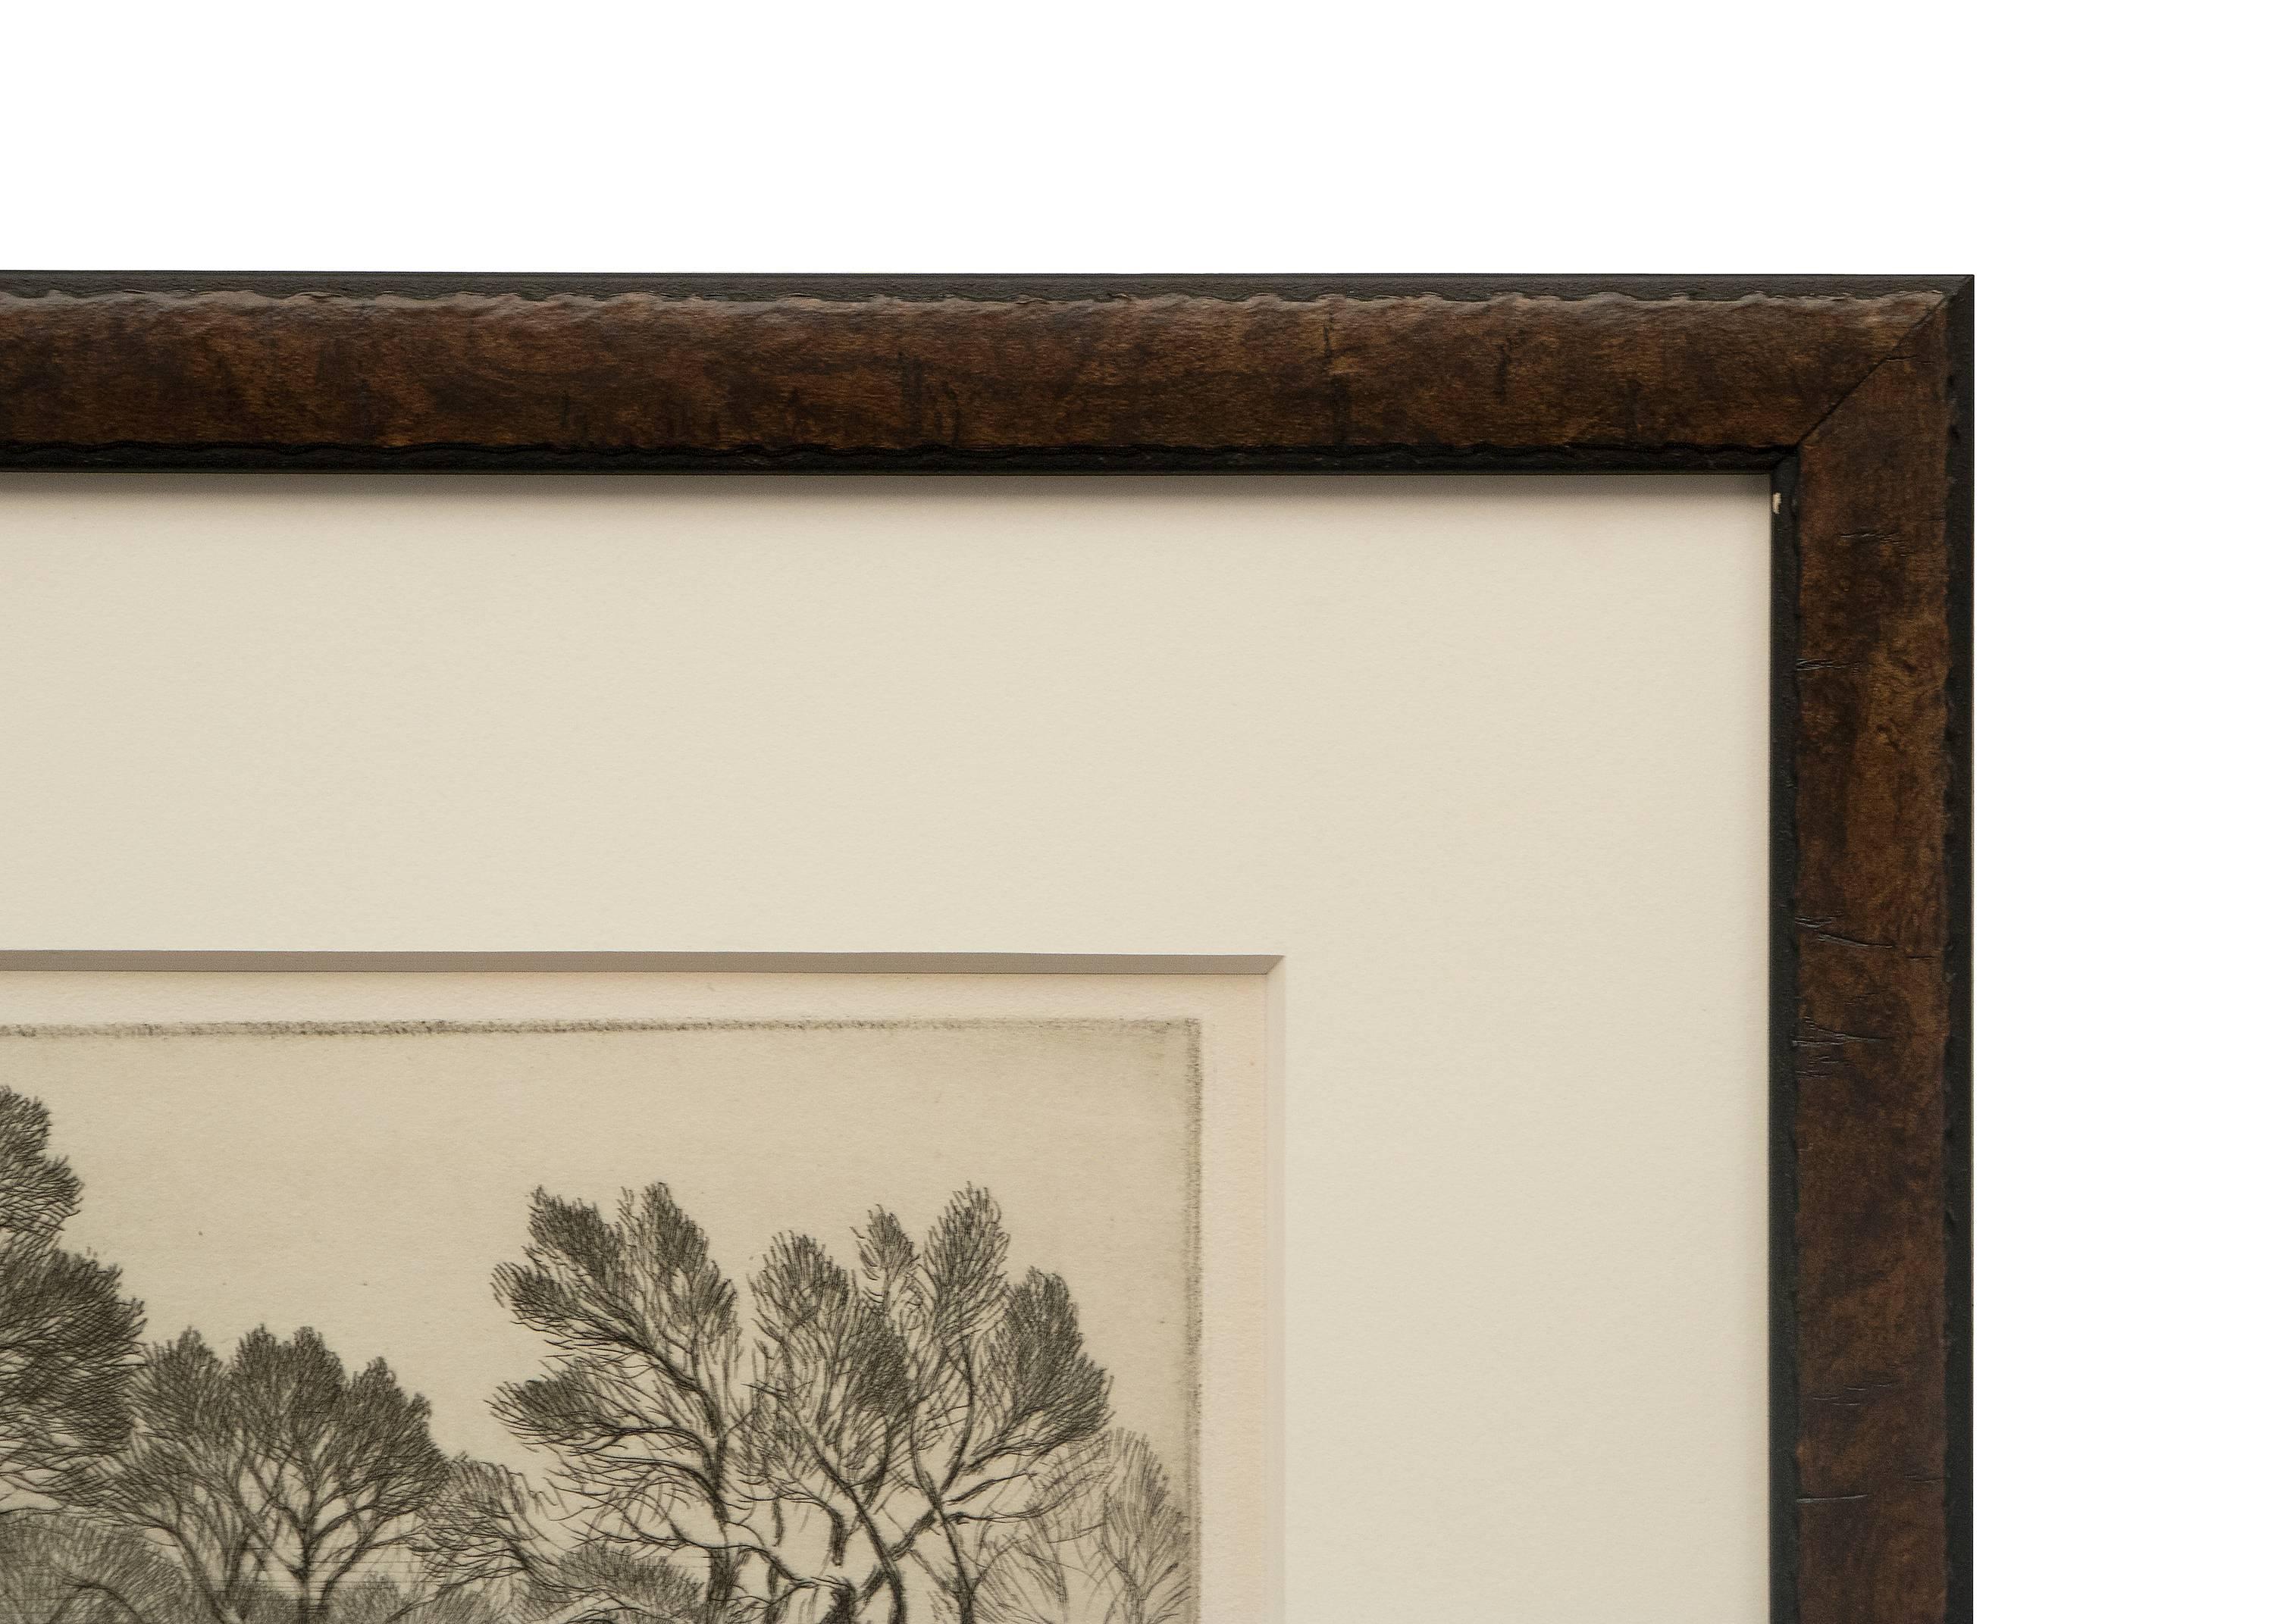 Pencil signed and titled in lower margin.  Presented in a custom frame with all archival materials and museum glass, outer dimensions measure 15 ¾ x 18 ½ x 1 ¼ inches.  Image size is 8 x 11 ½ inches.
Gene (Alice Geneva) Kloss is considered one of